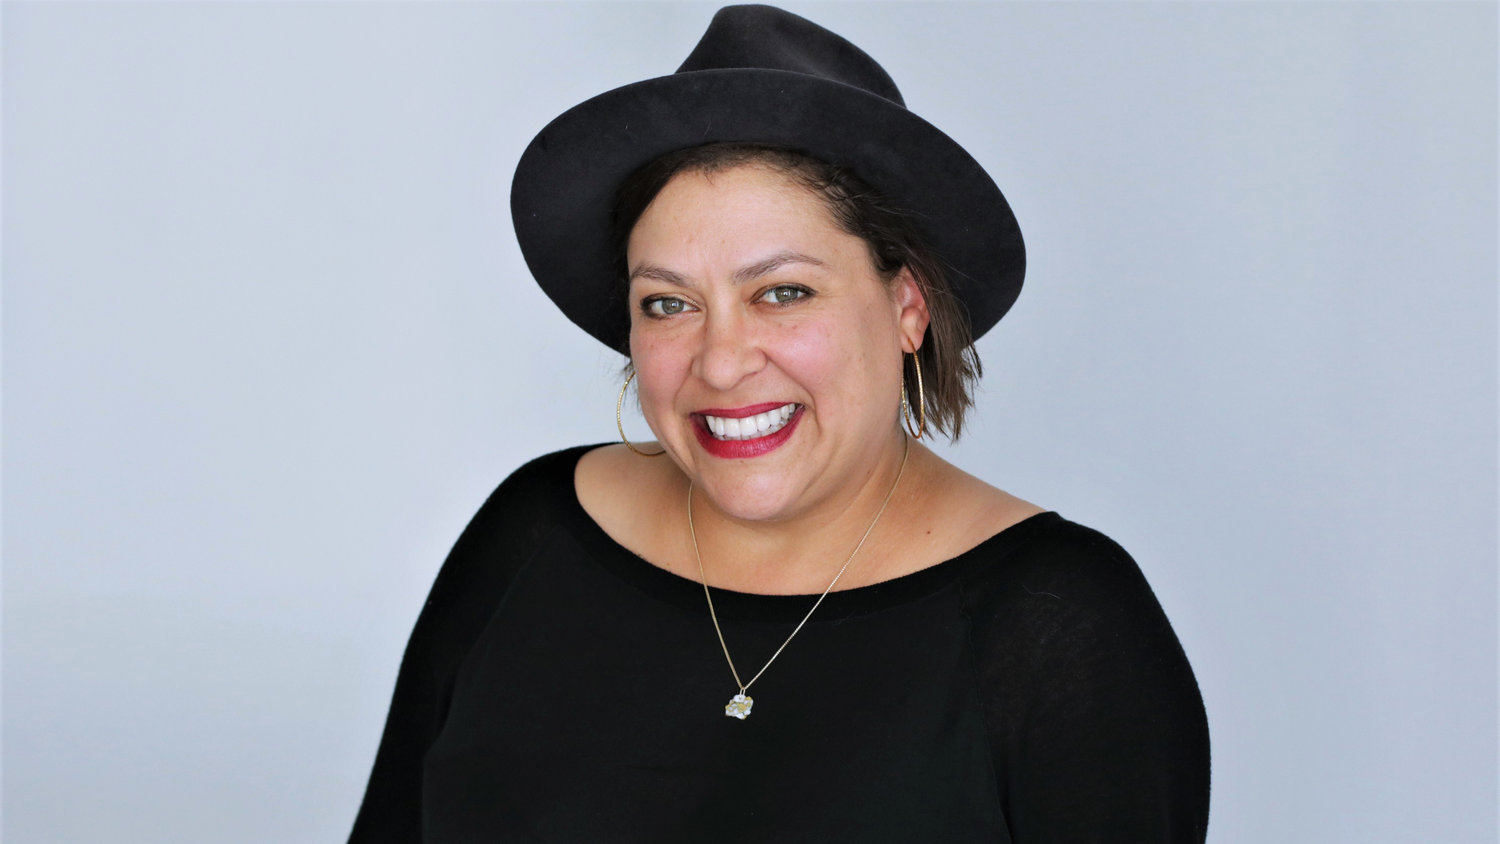 Portrait of Vinovore owner Coly Den Haan wearing a black hat and shirt, with a necklace and red lipstick